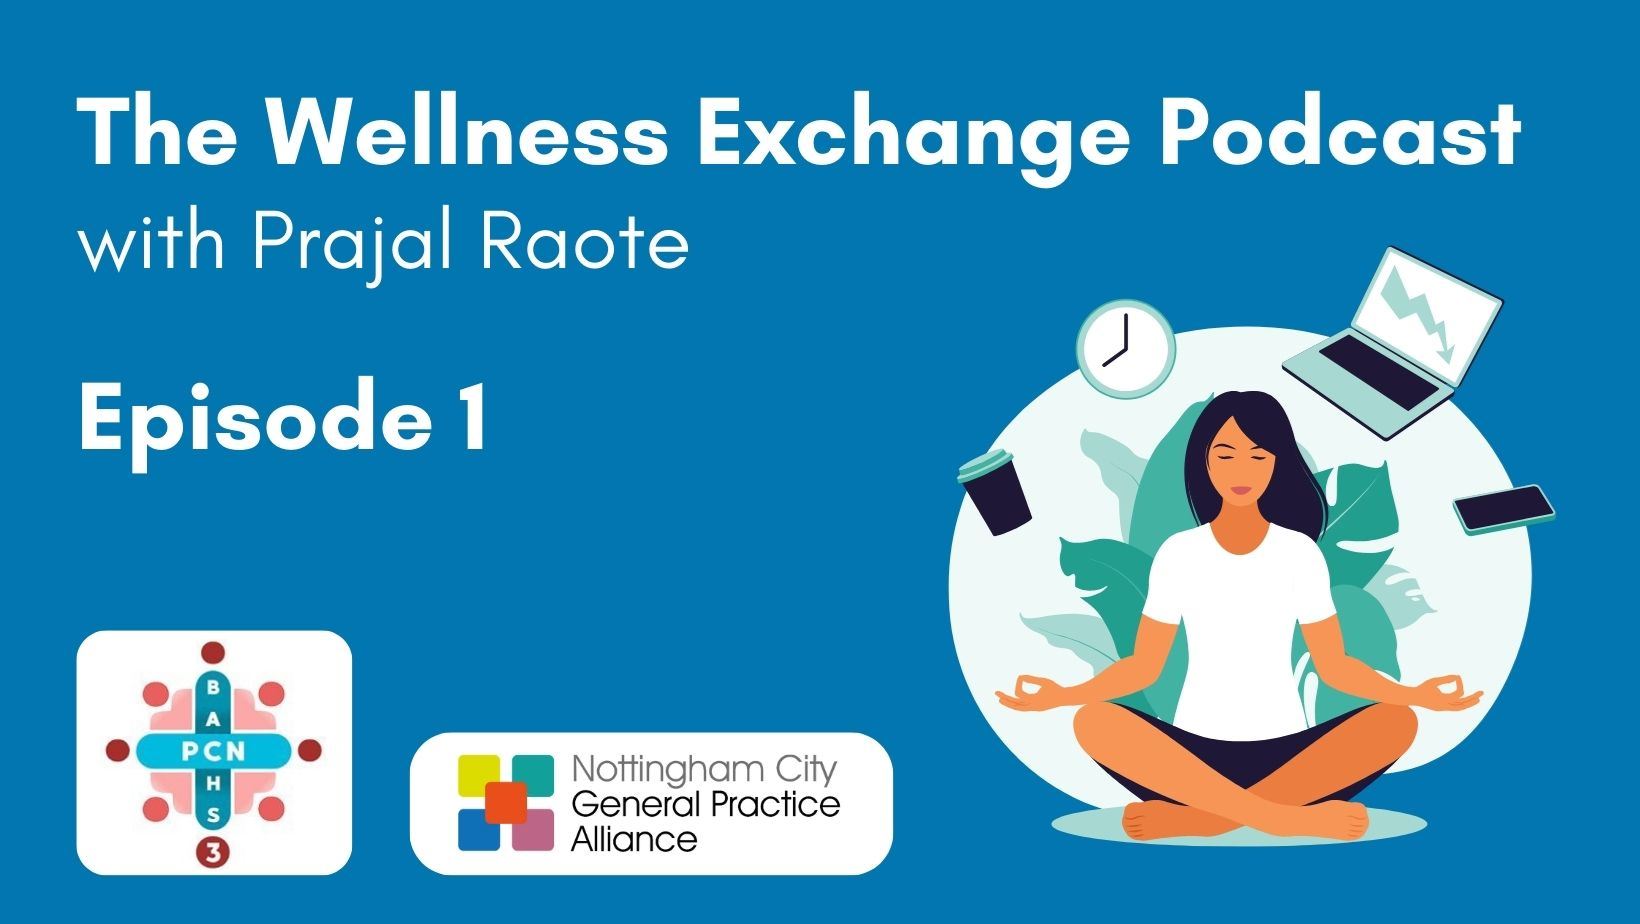 Text says "The Wellness Exchange Podcast" with Prajal Raote